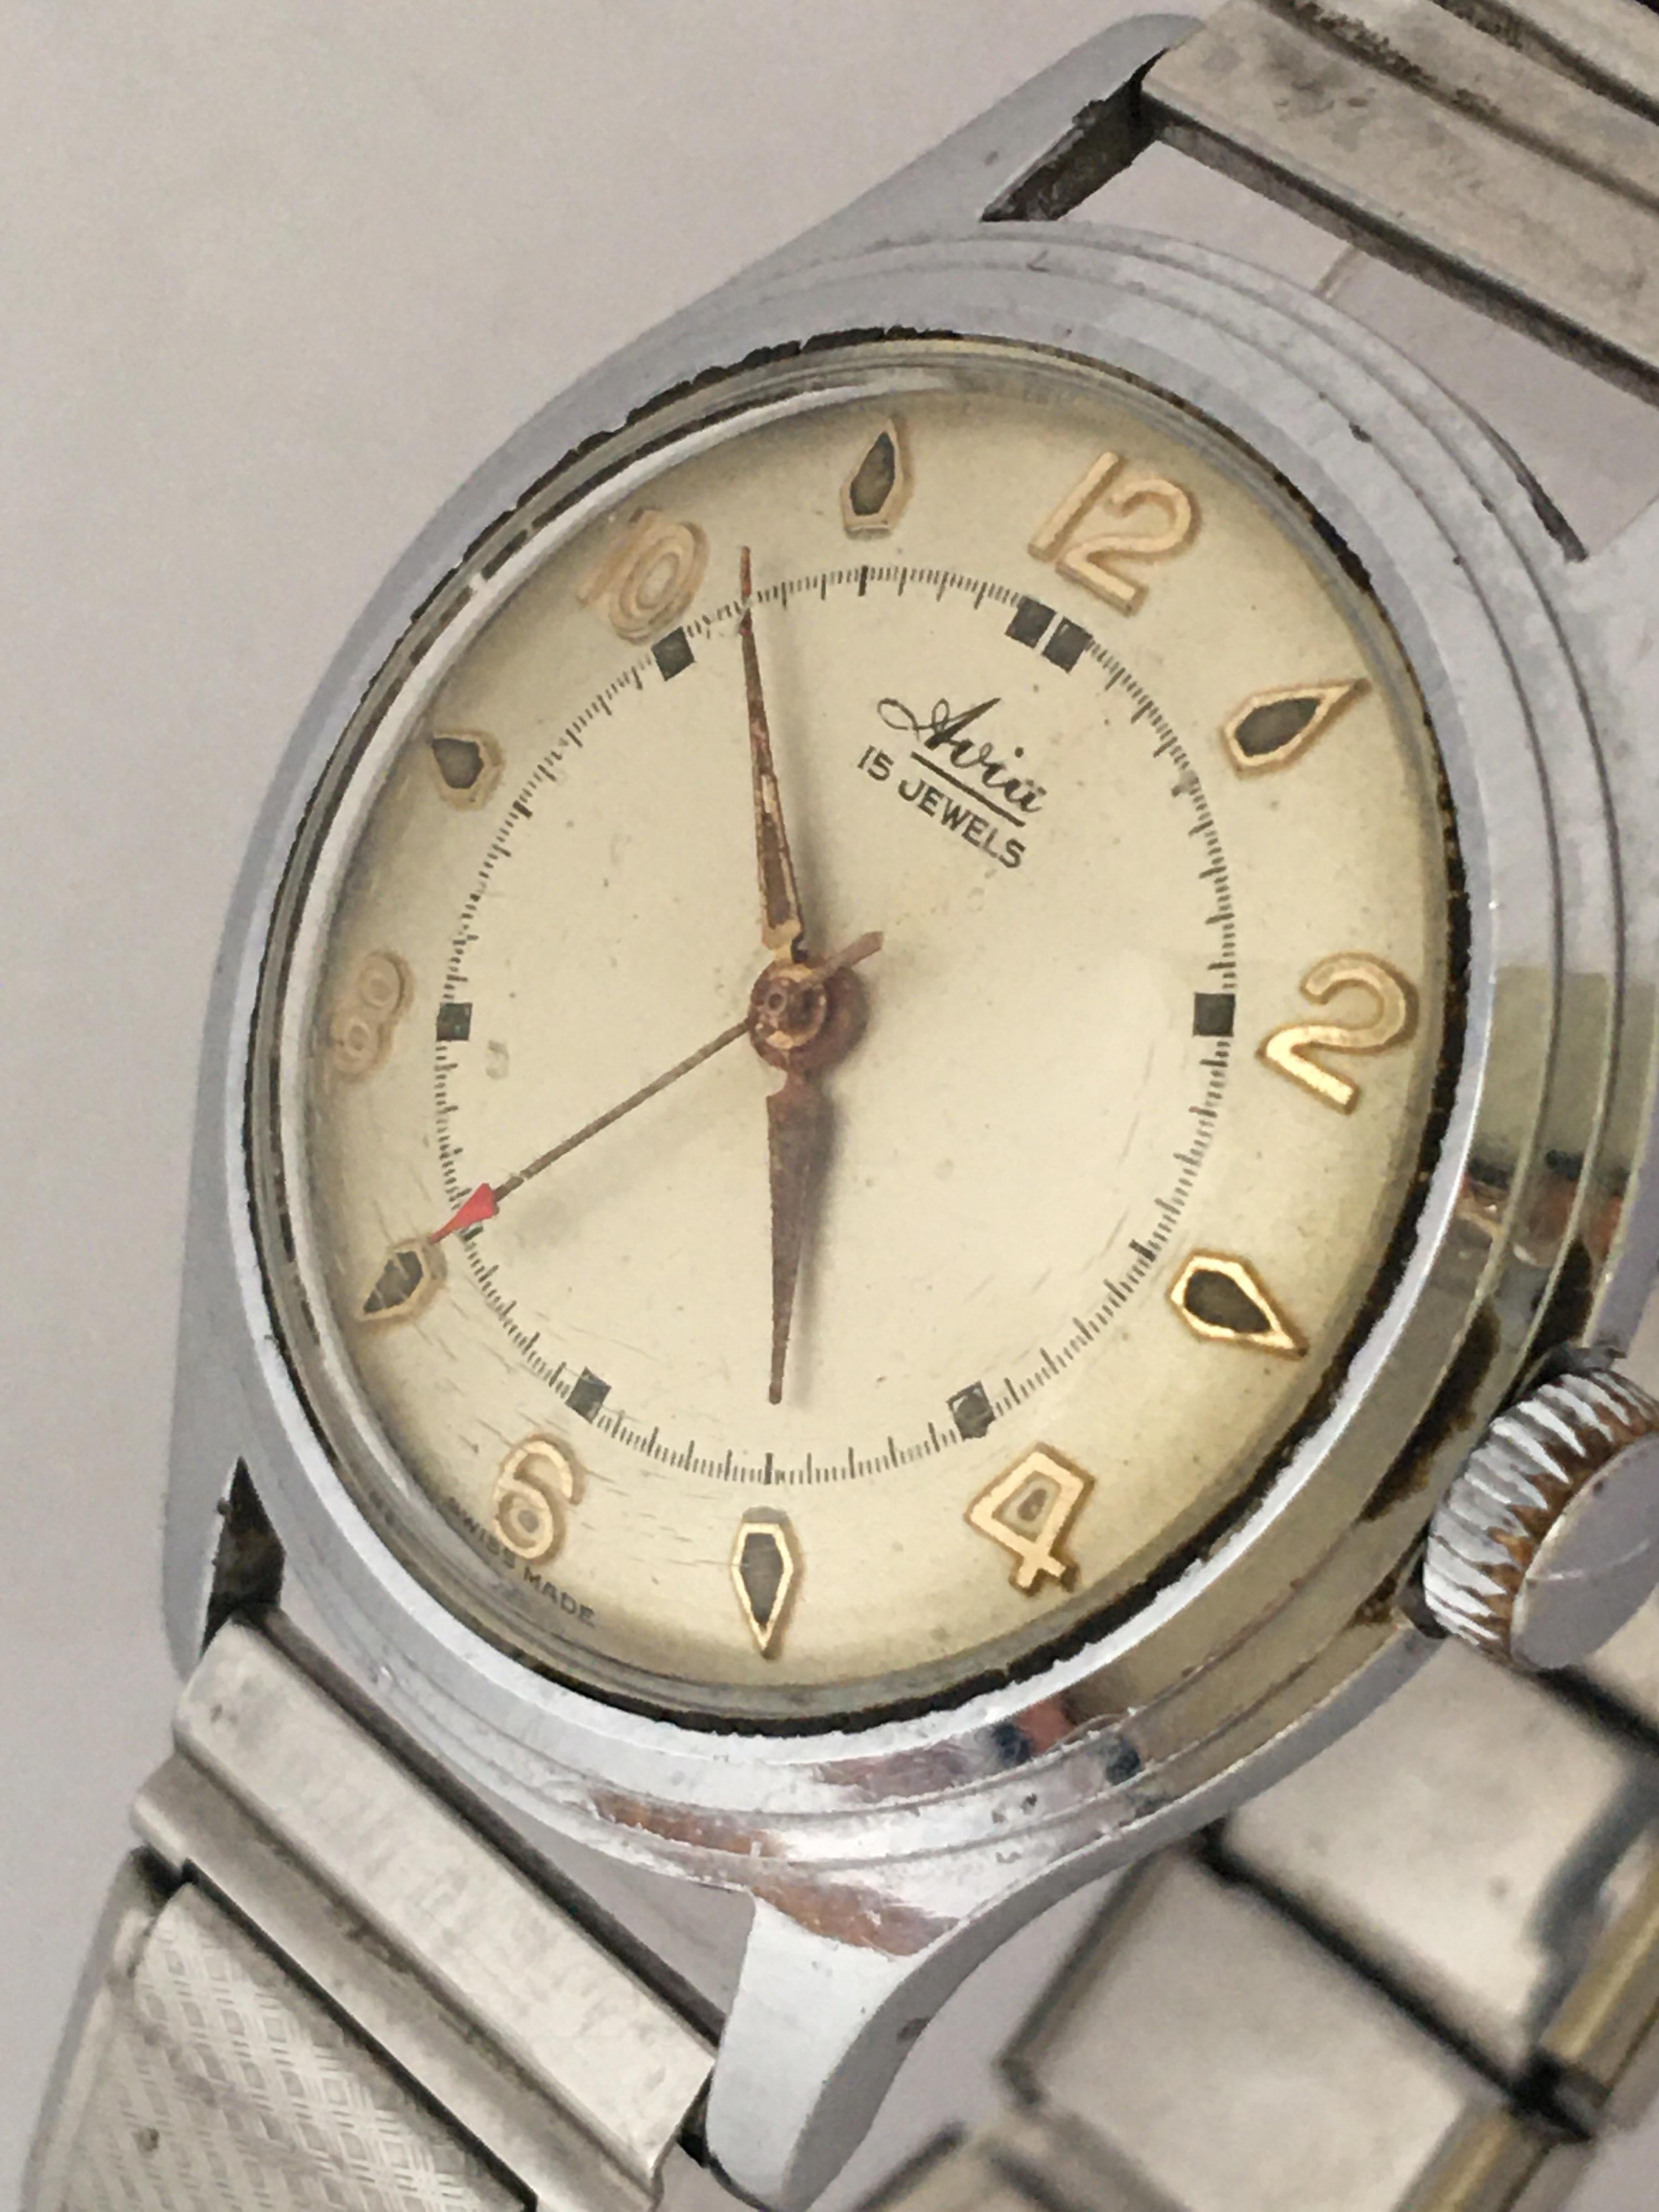 This beautiful pre-owned vintage manual winding watch is working and it is running well. Visible signs of wearing and ageing with some scratches on the glass and on the watch case. The winder, hands and its case are a bit tarnished as shown.

Please